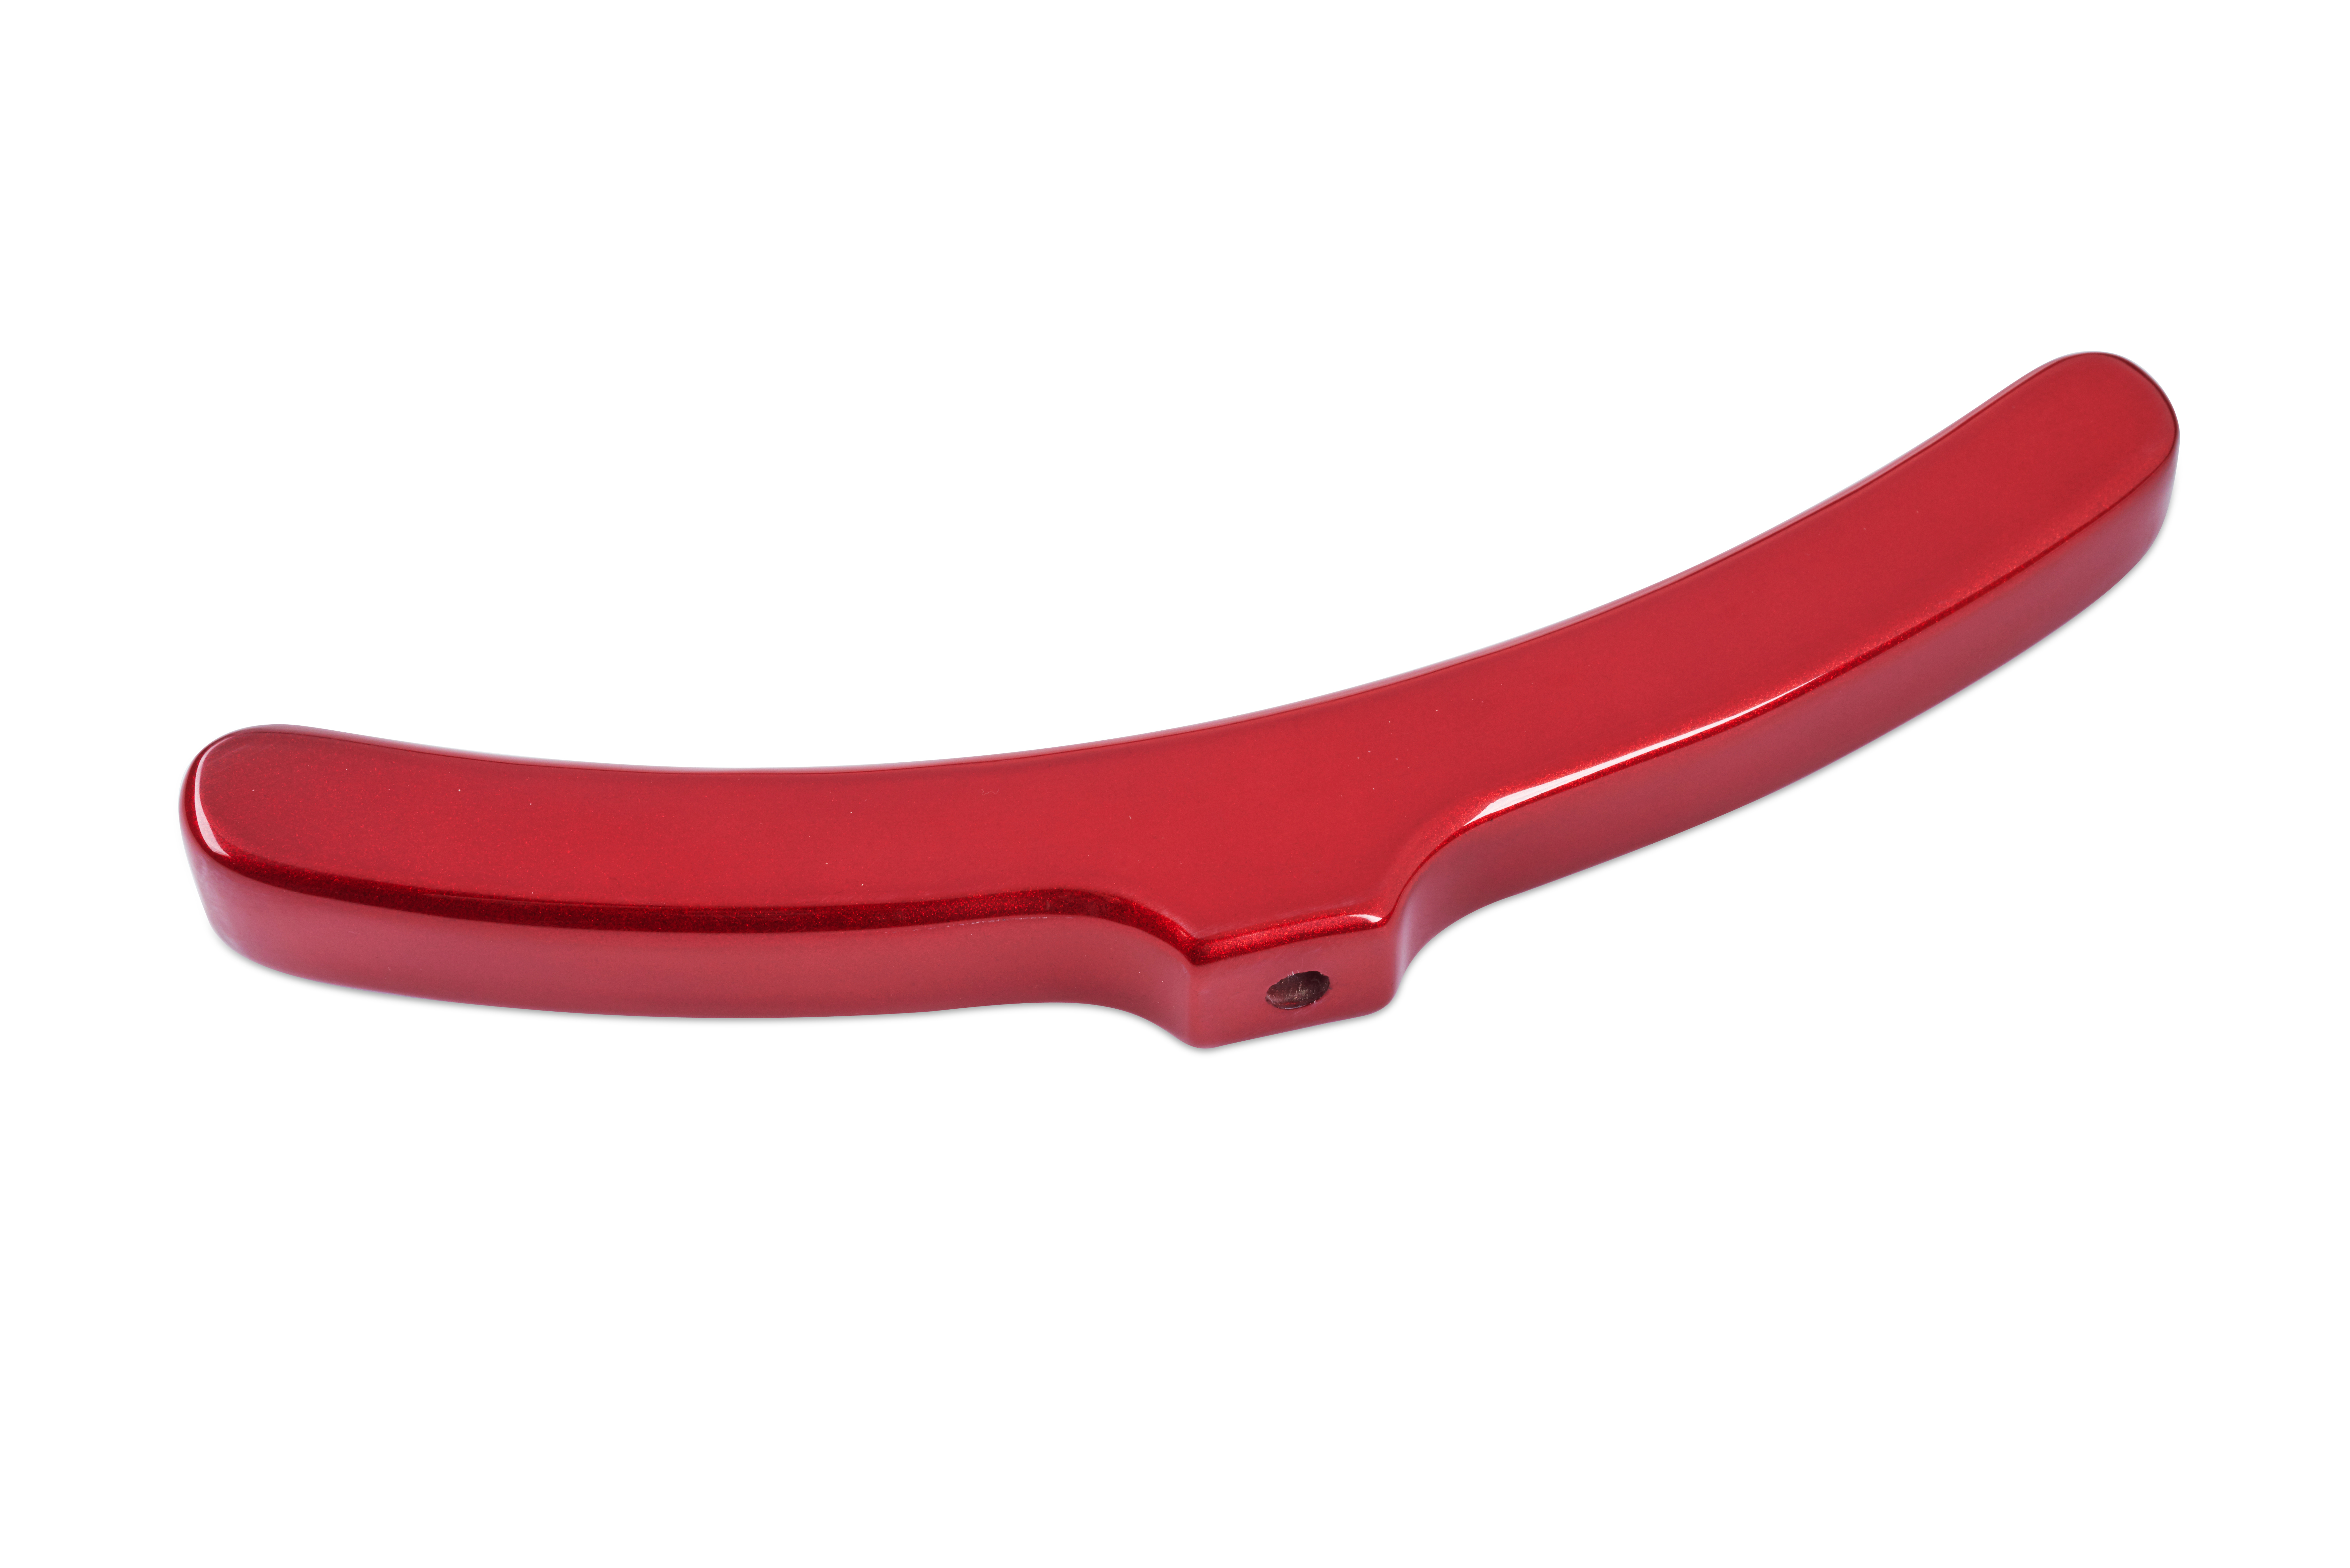 RockBass Triumph Belly Rest Metallic Red with